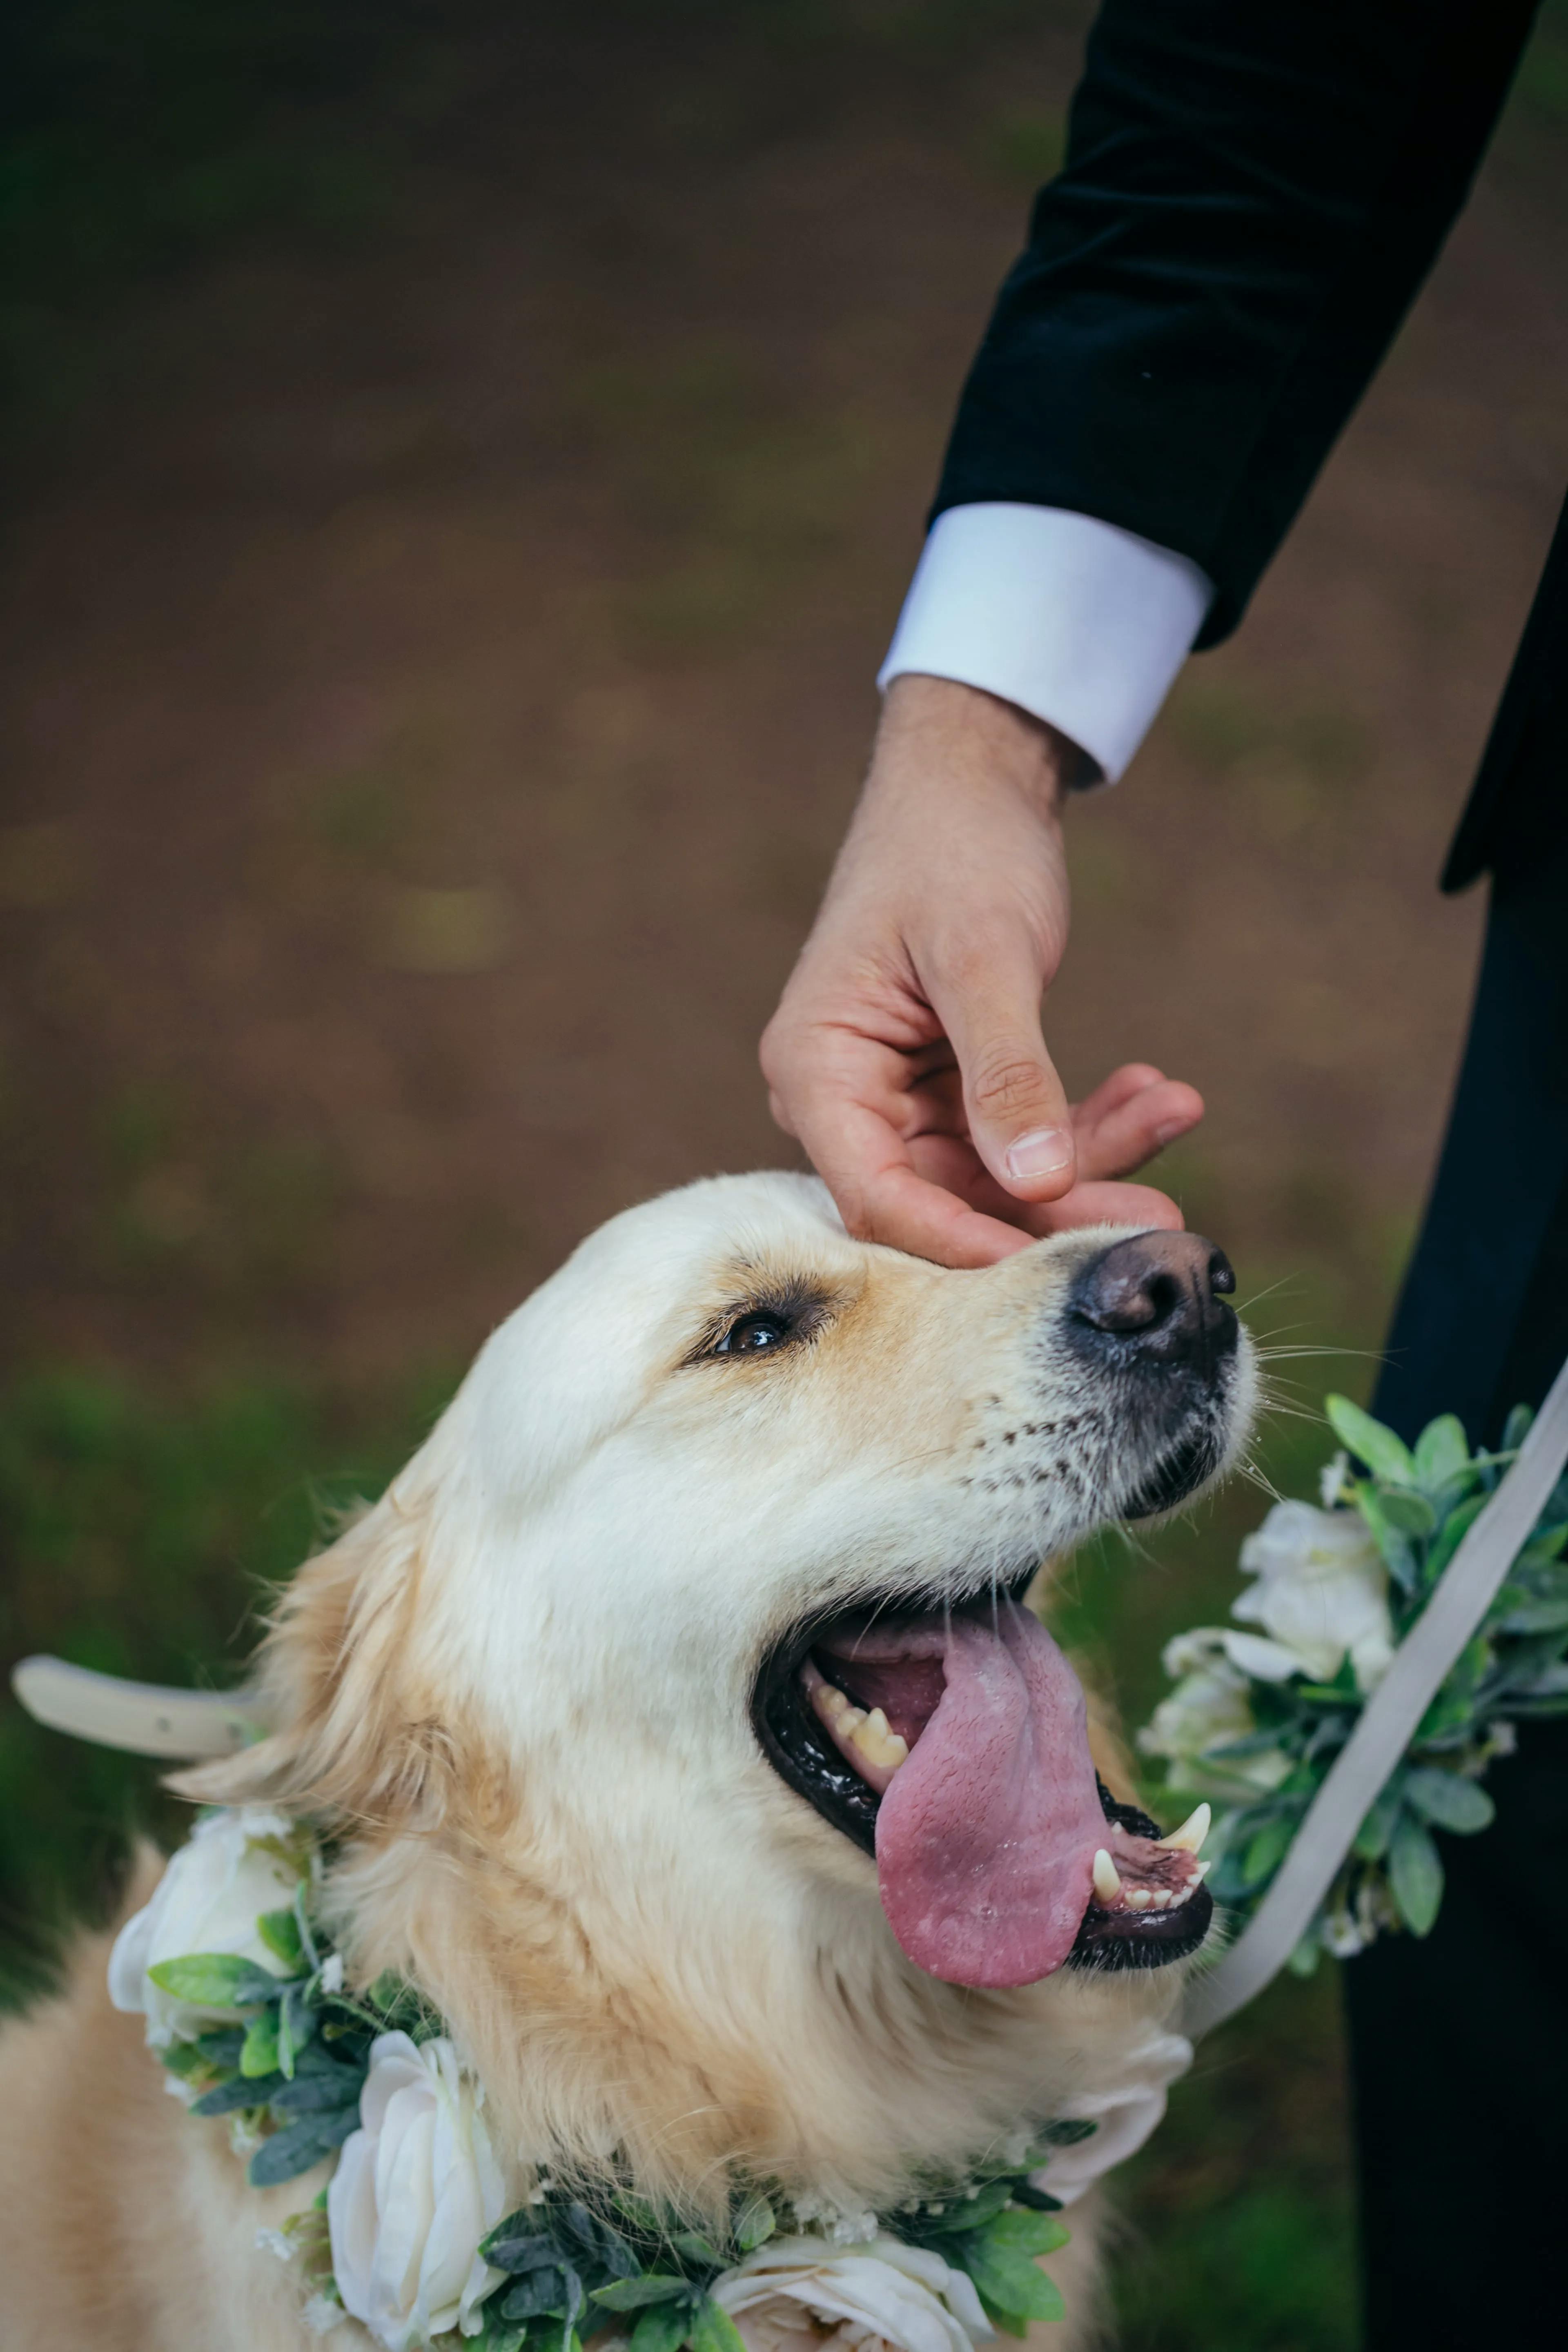 A close-up of a happy golden retriever with its tongue out wearing a floral collar, being gently petted on the head by a person in a suit. The background is blurred, focusing on the joyful expression of the dog and the affectionate gesture.